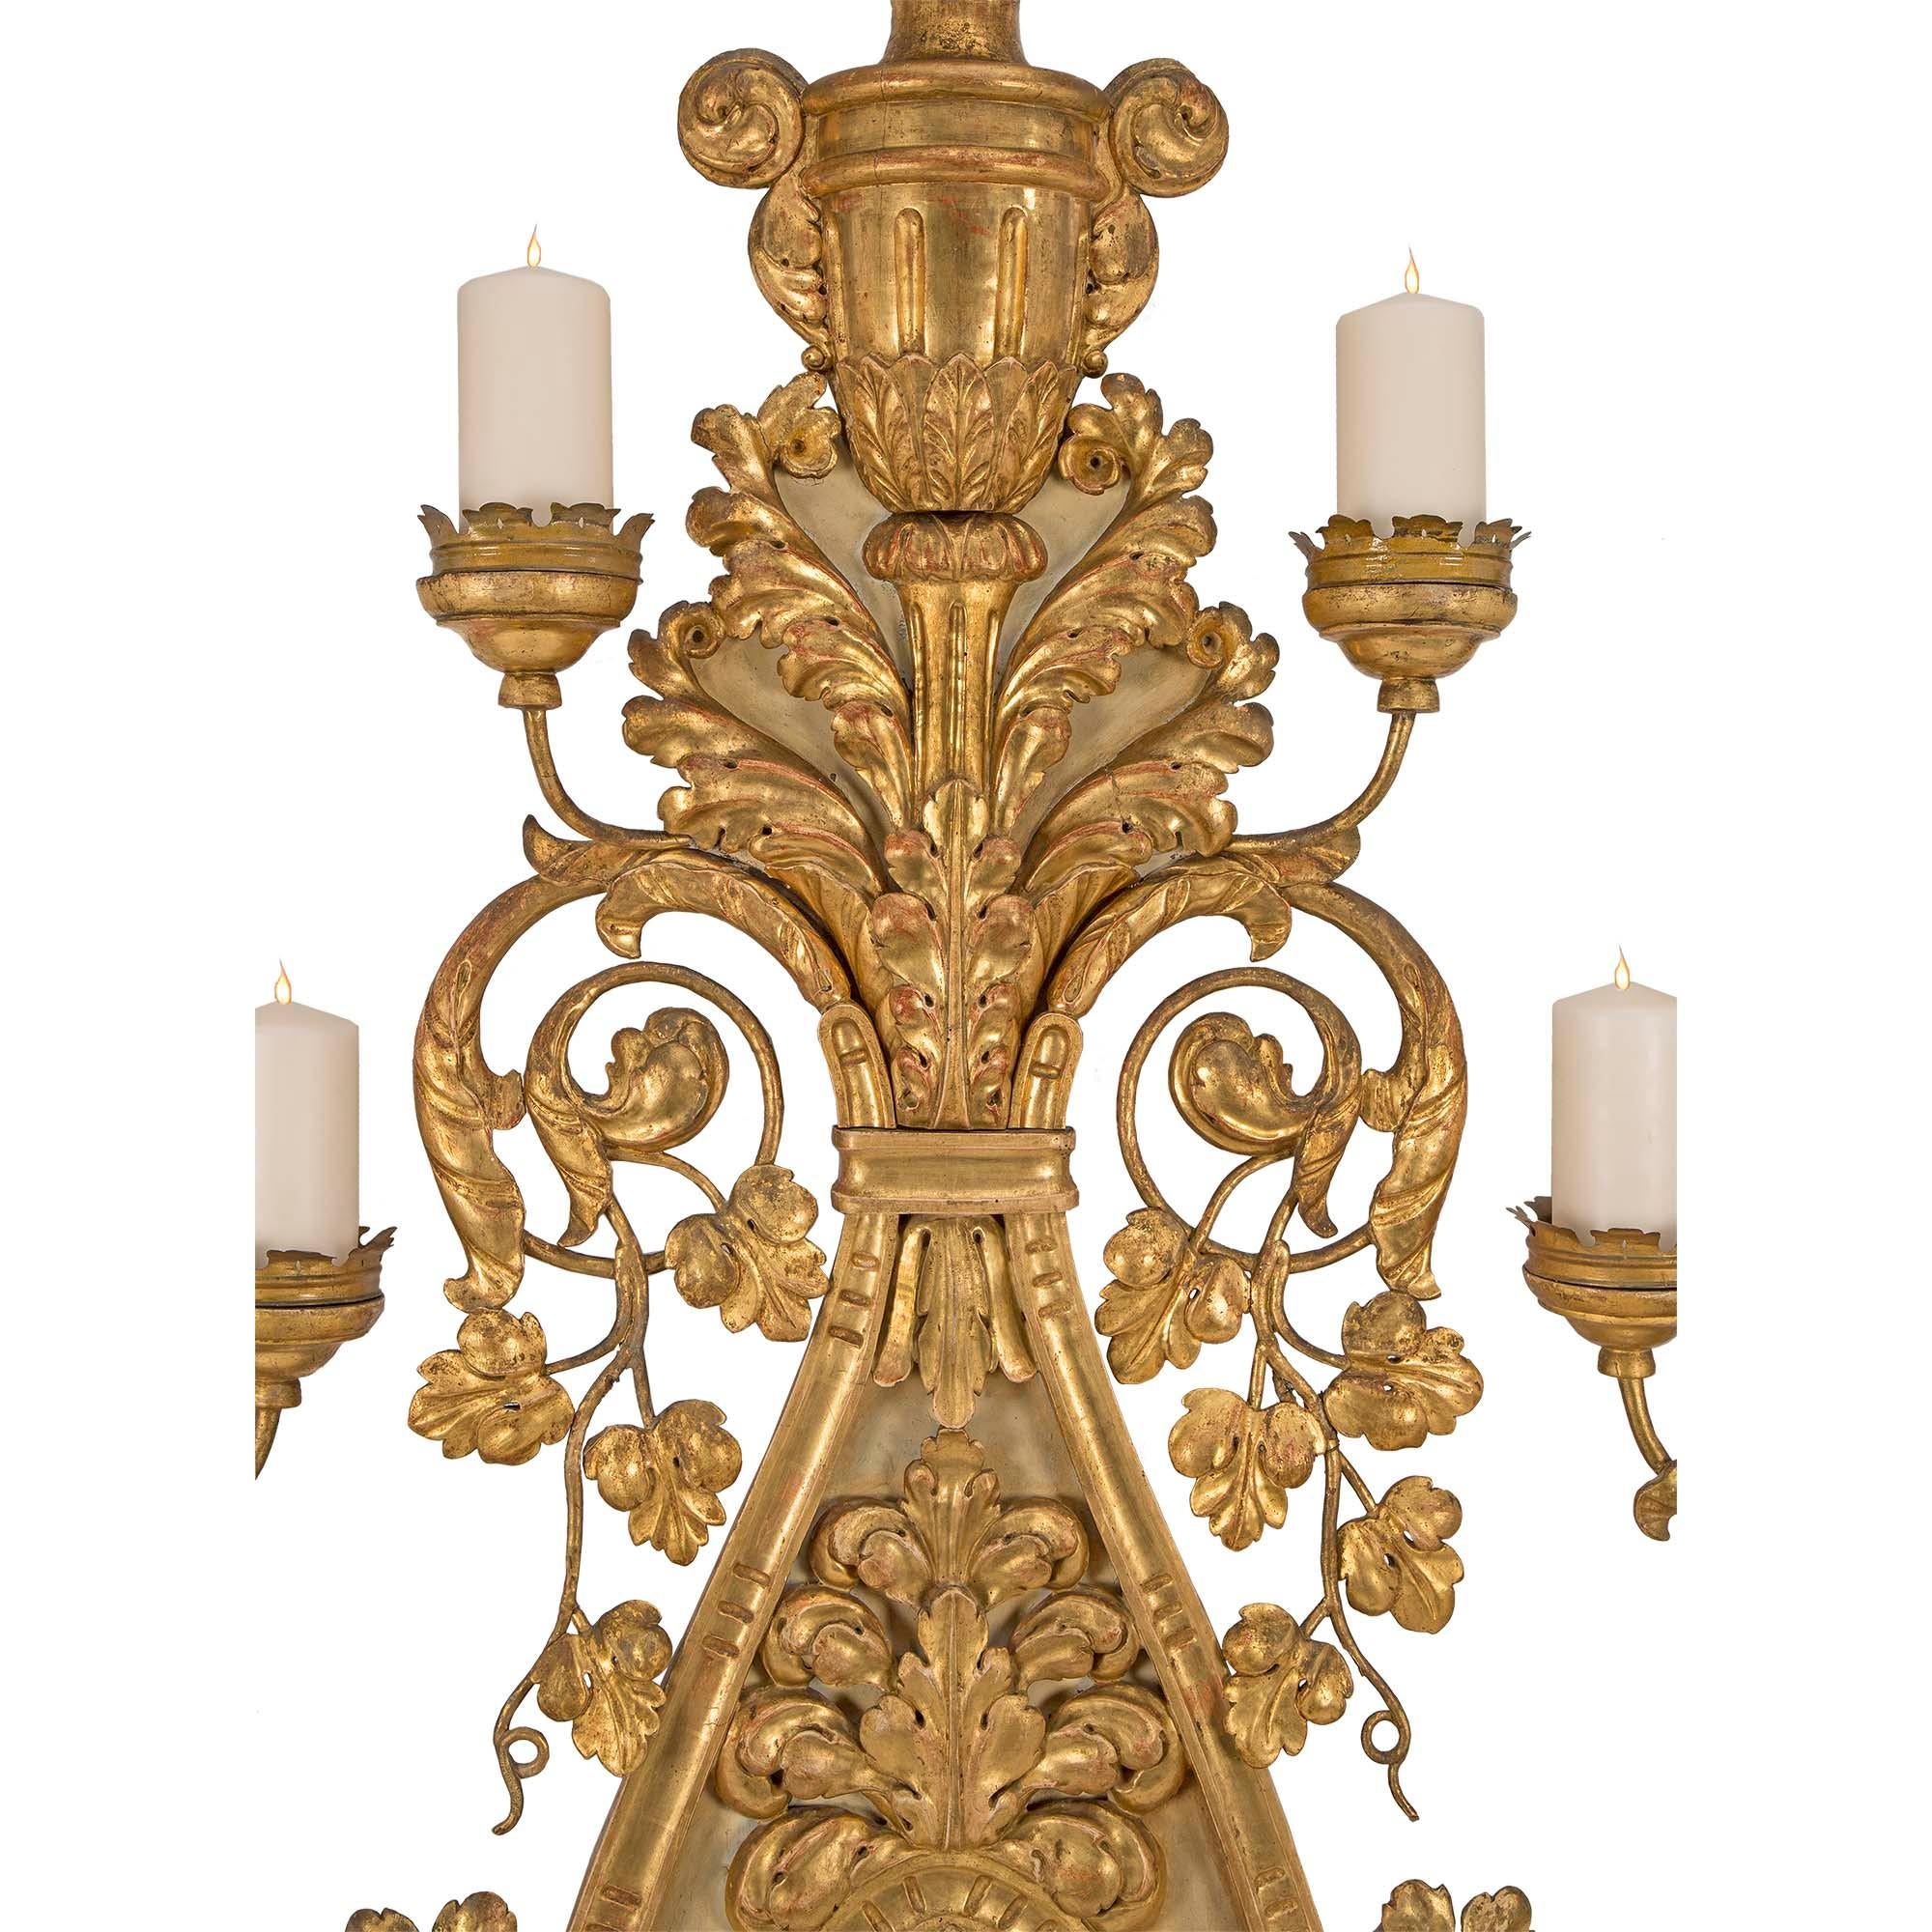 Italian 18th Century Monumental Giltwood and Gilt Metal Tuscan Candelabras For Sale 1